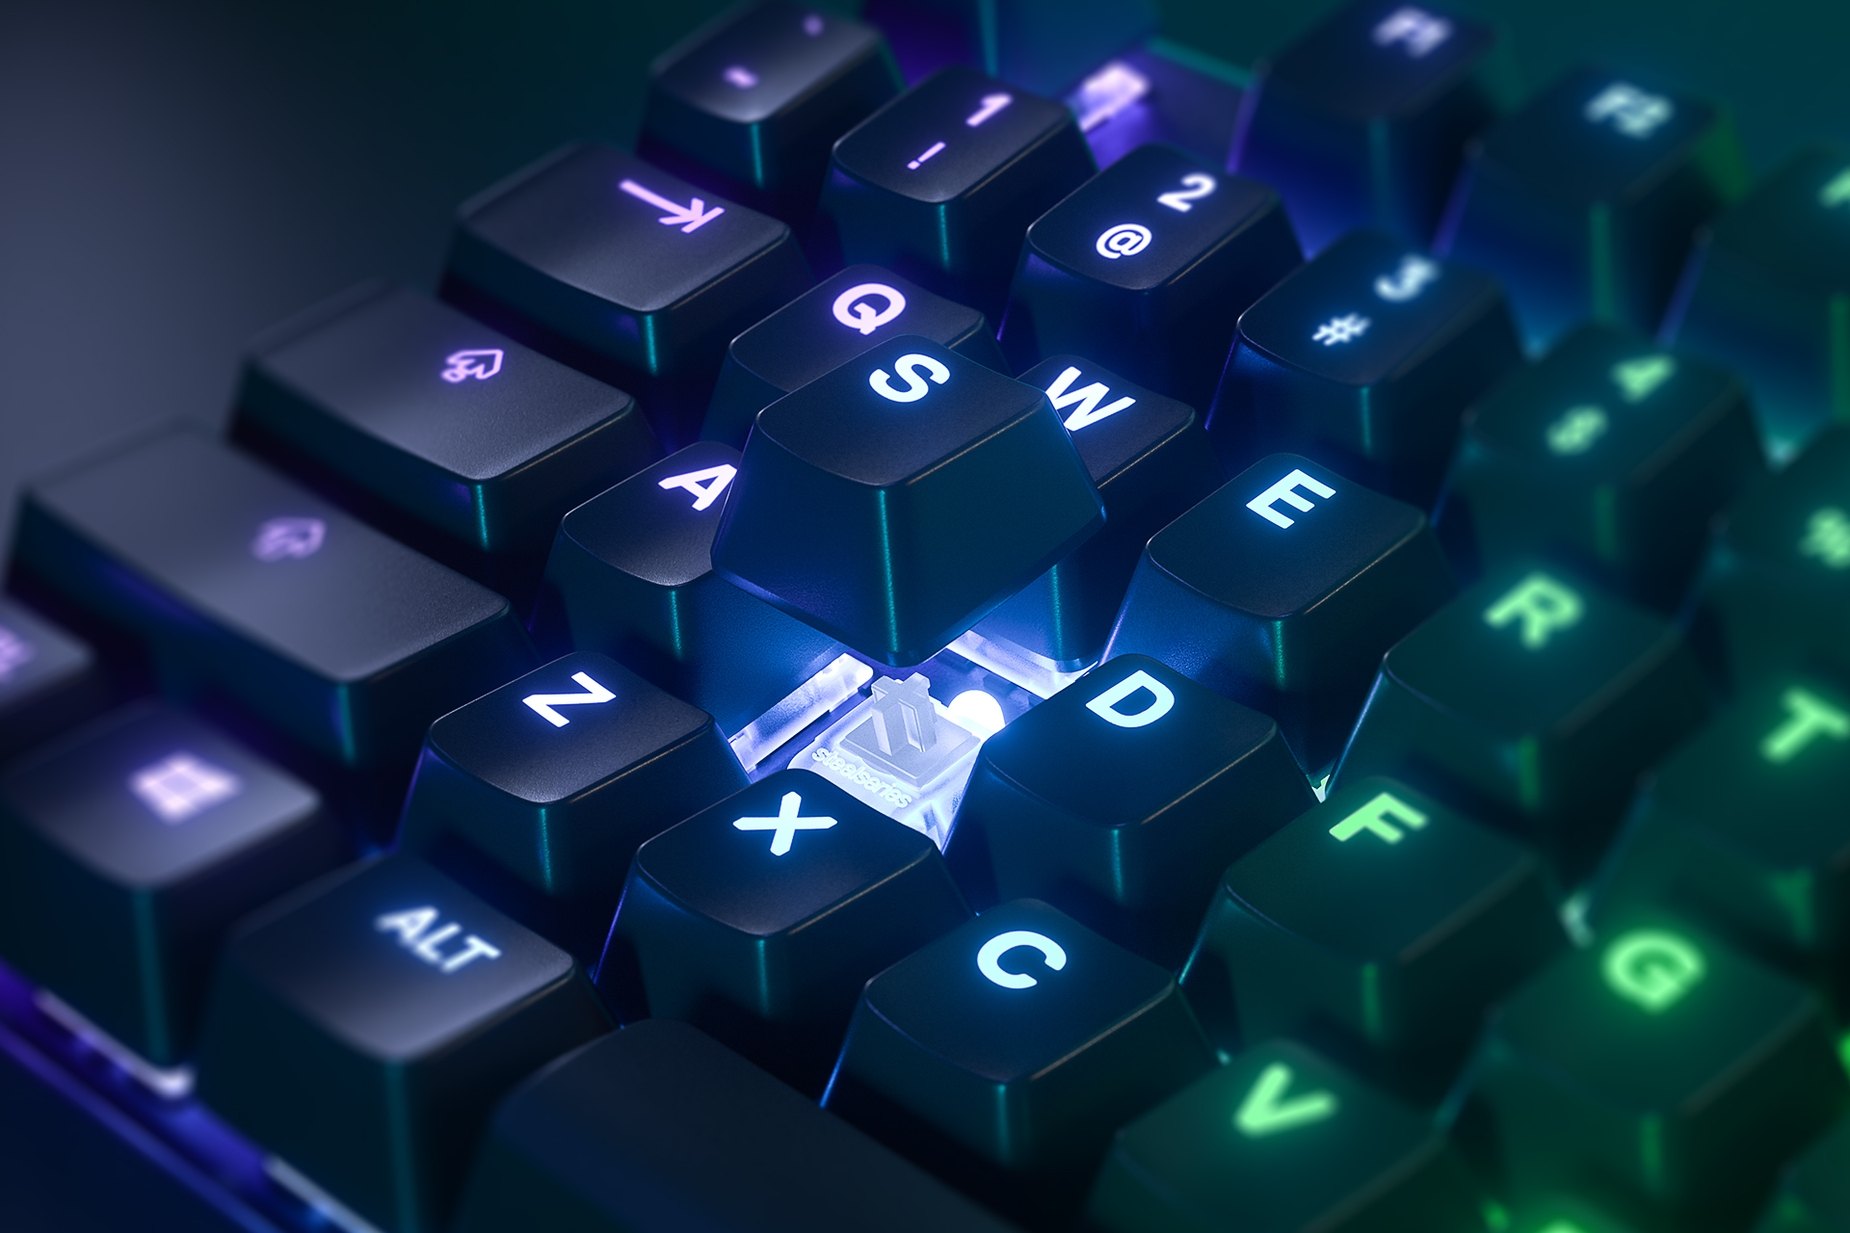 
 Zoomed in view of a single key on the German - Apex Pro gaming keyboard, the key is raised up to show the SteelSeries OmniPoint Adjustable Mechanical Switch underneath
 